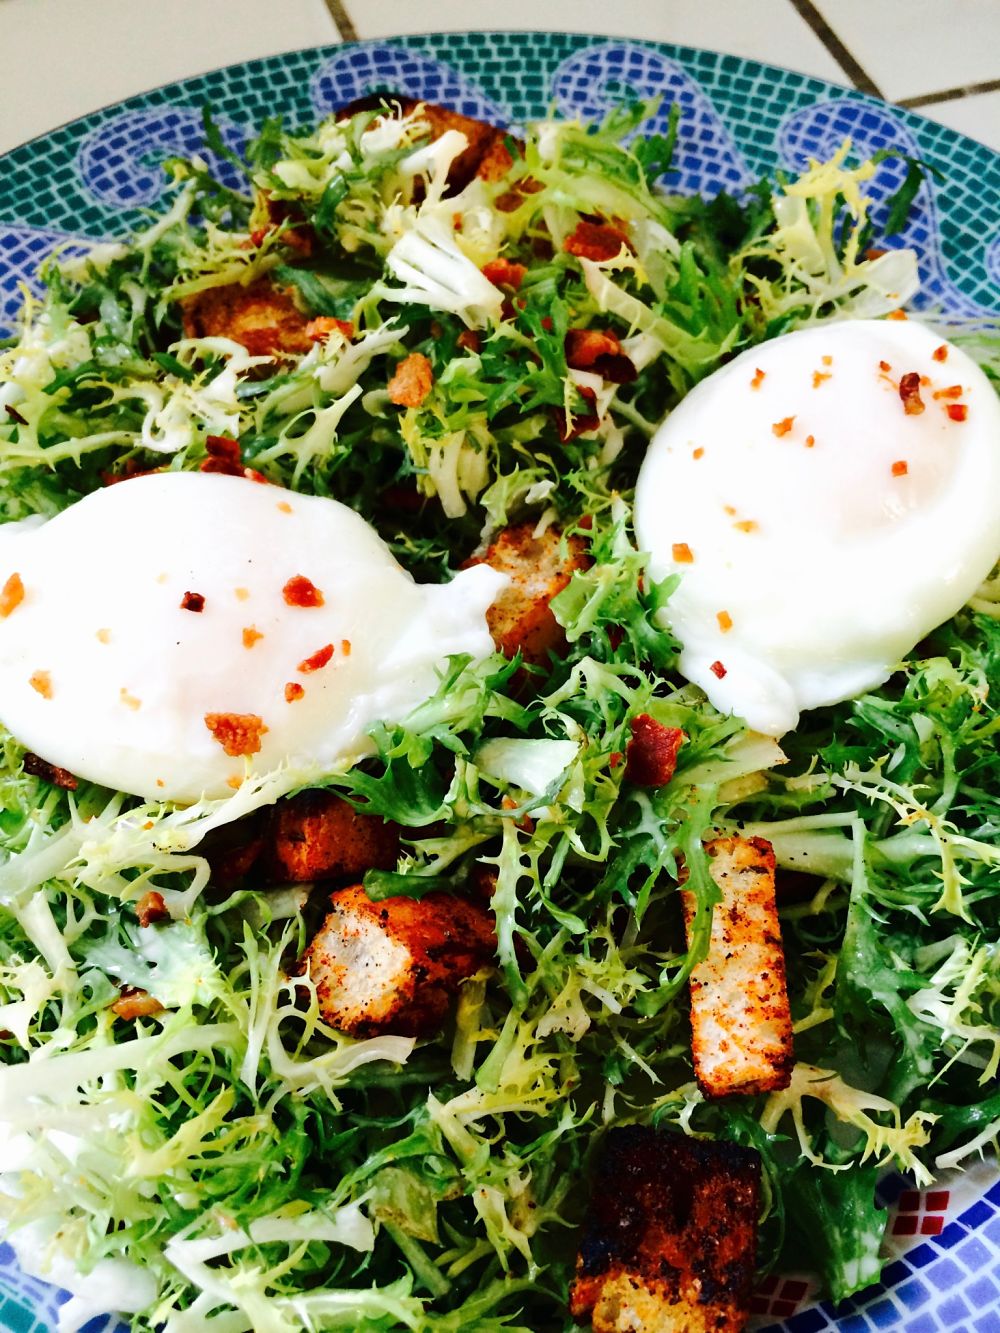 When you want a substantial salad but don't want a lot of fuss. This recipe for Bacon and Eggs Frise' Salad will fill you up and not break the calorie budget! https://westviamidwest.com